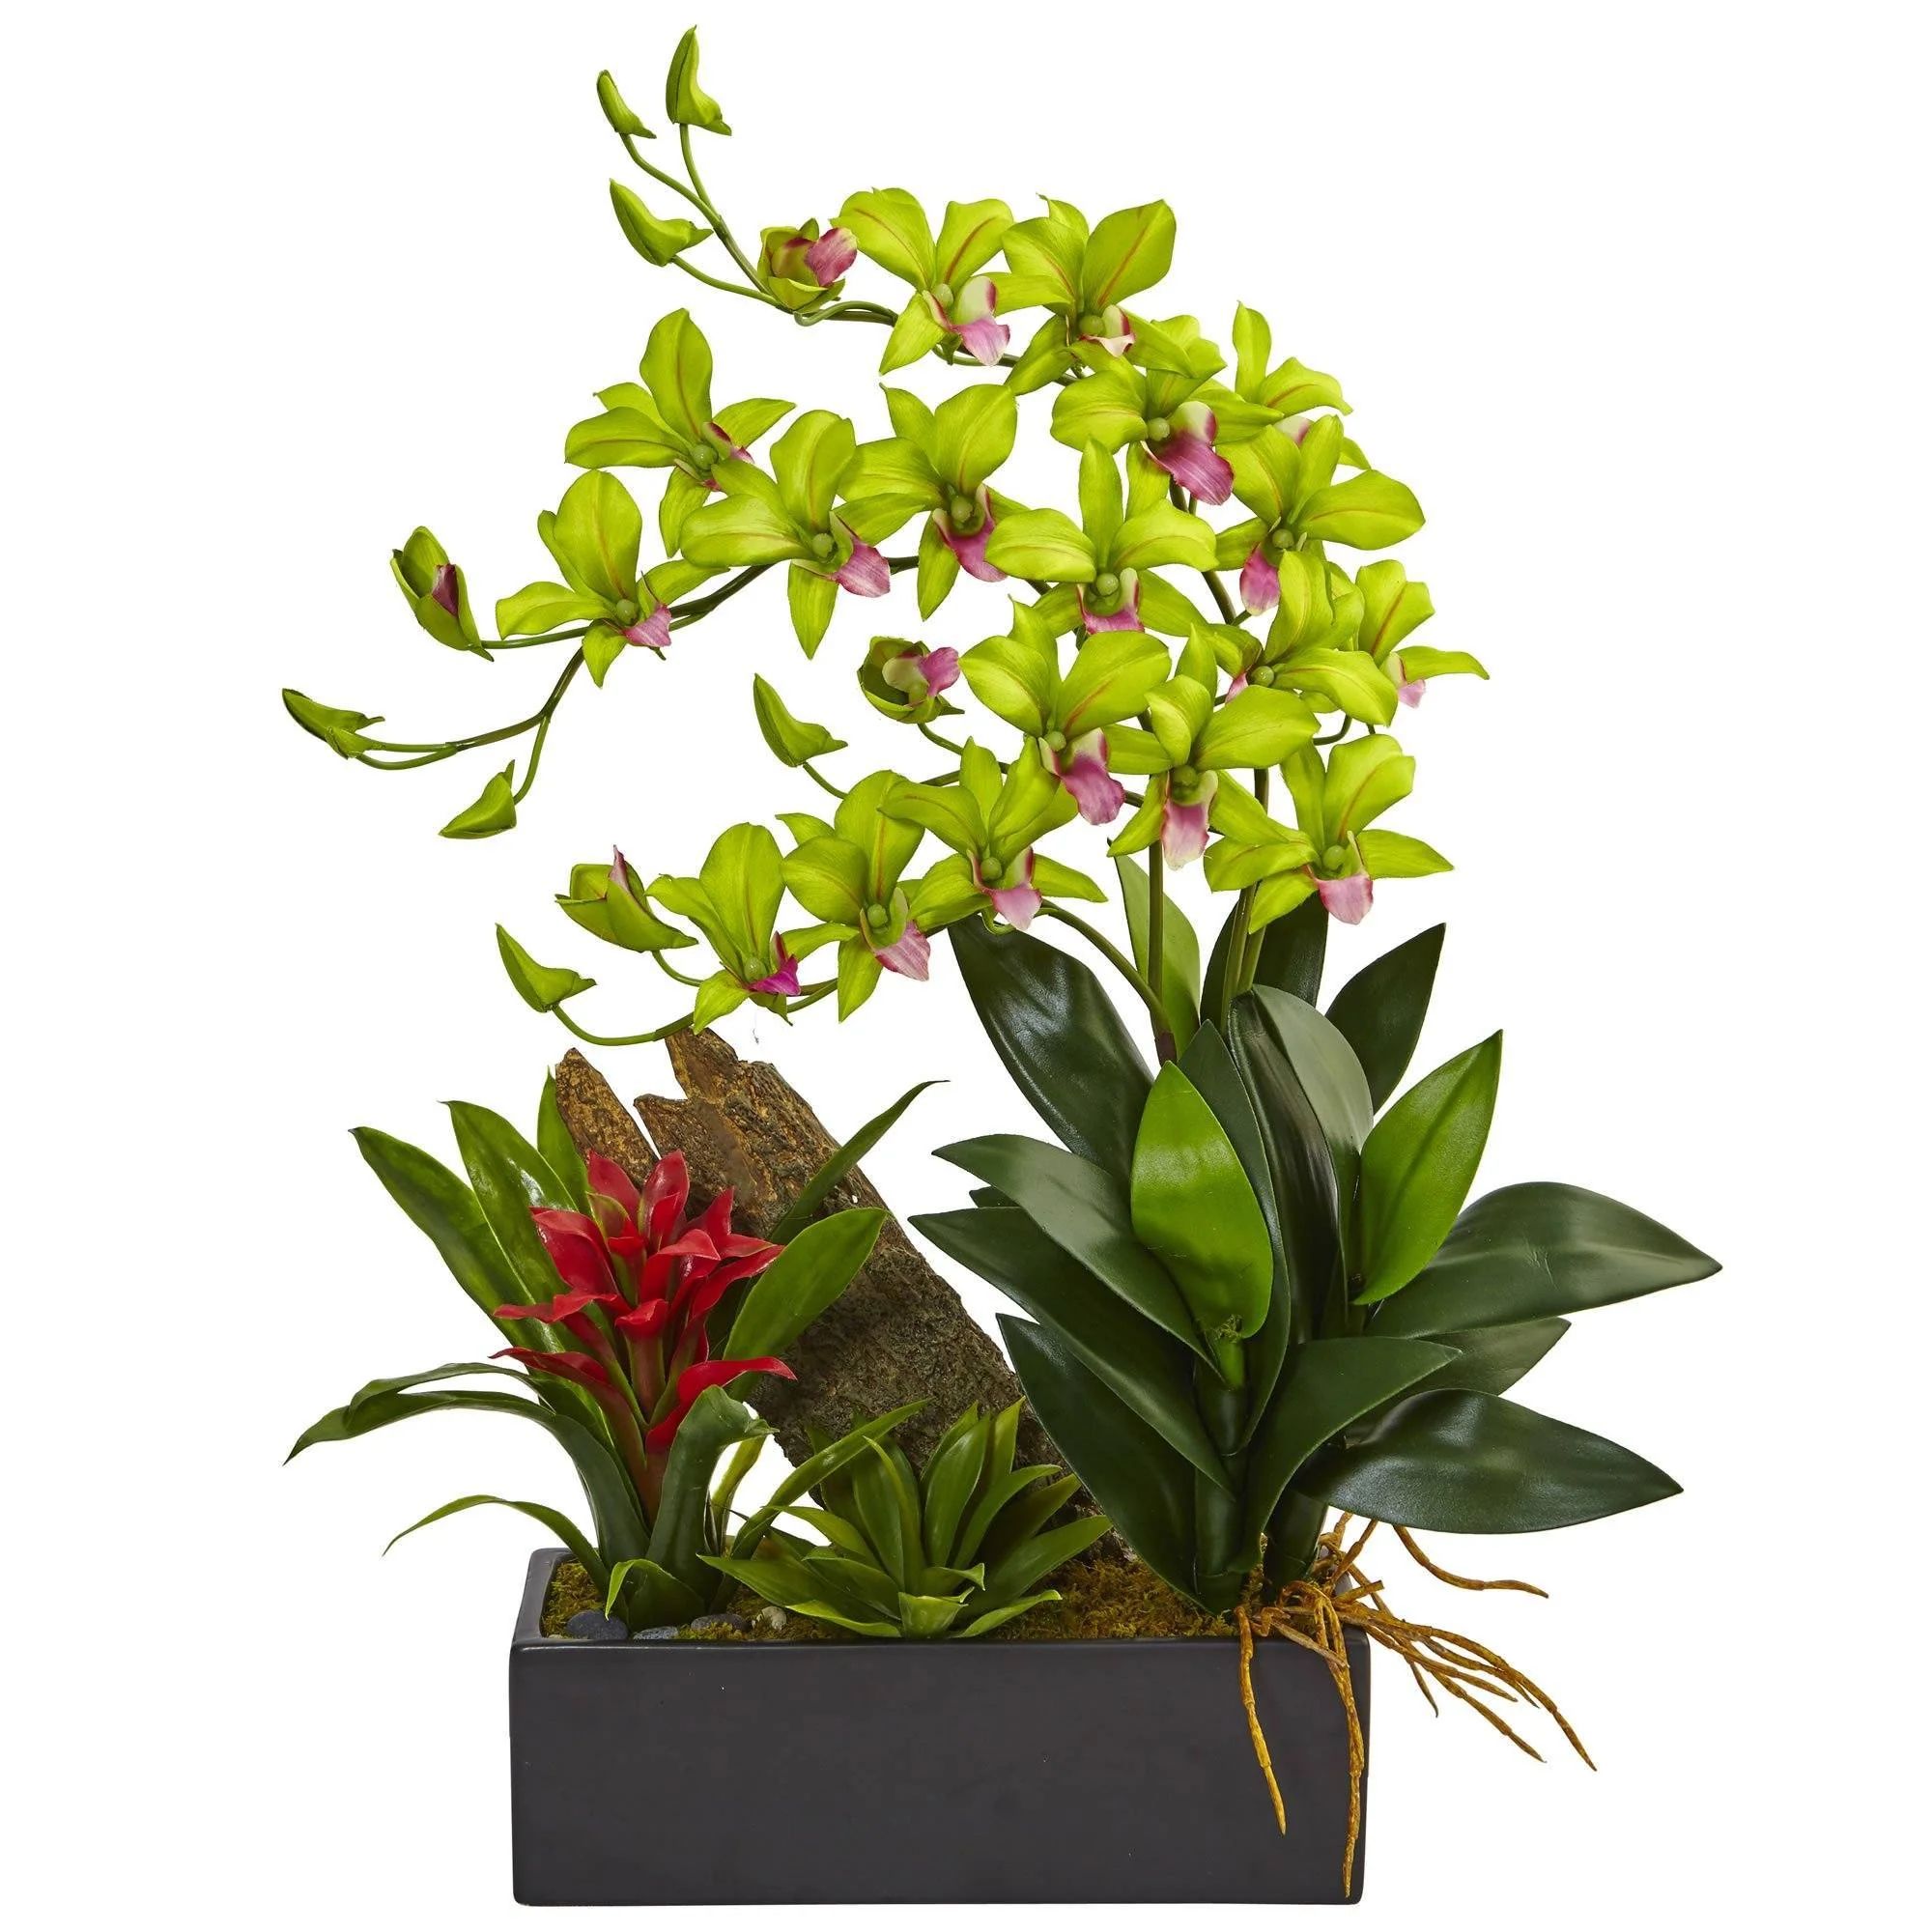 Dendrobium and Bromeliad Arrangement | Nearly Natural | Nearly Natural